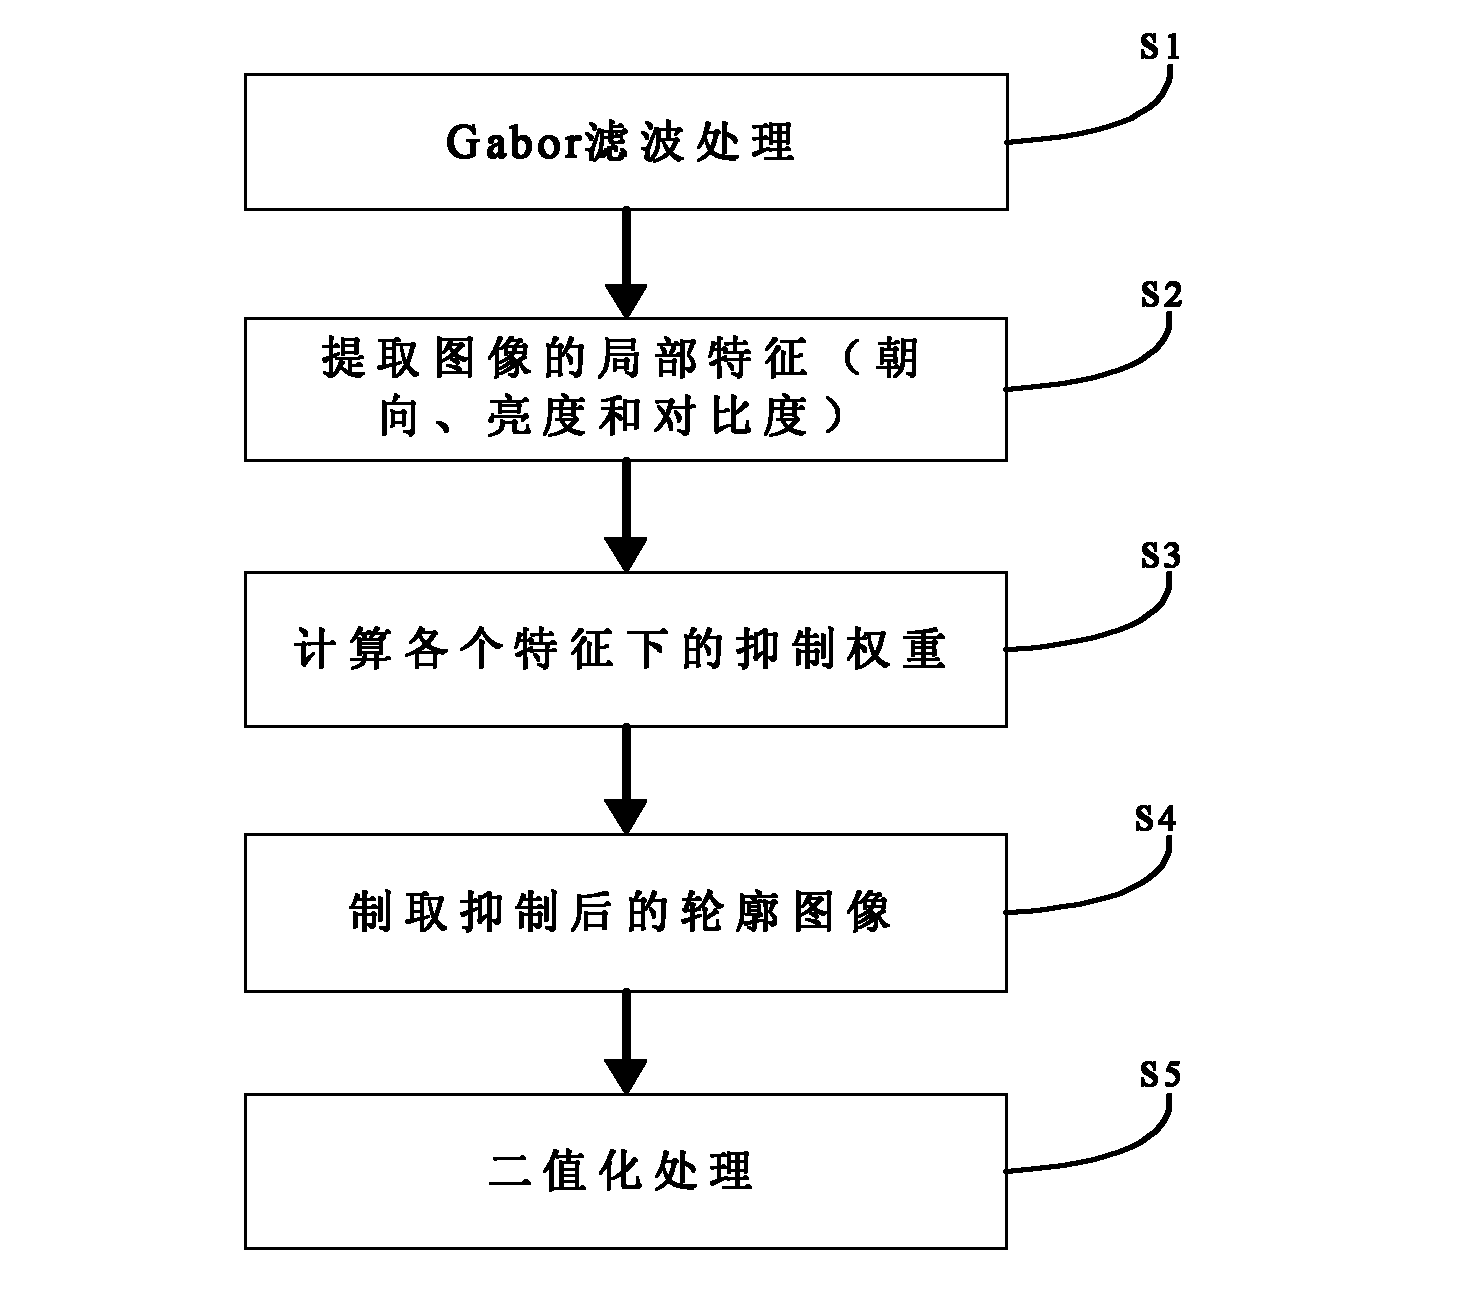 Multifeature-based target object contour detection method